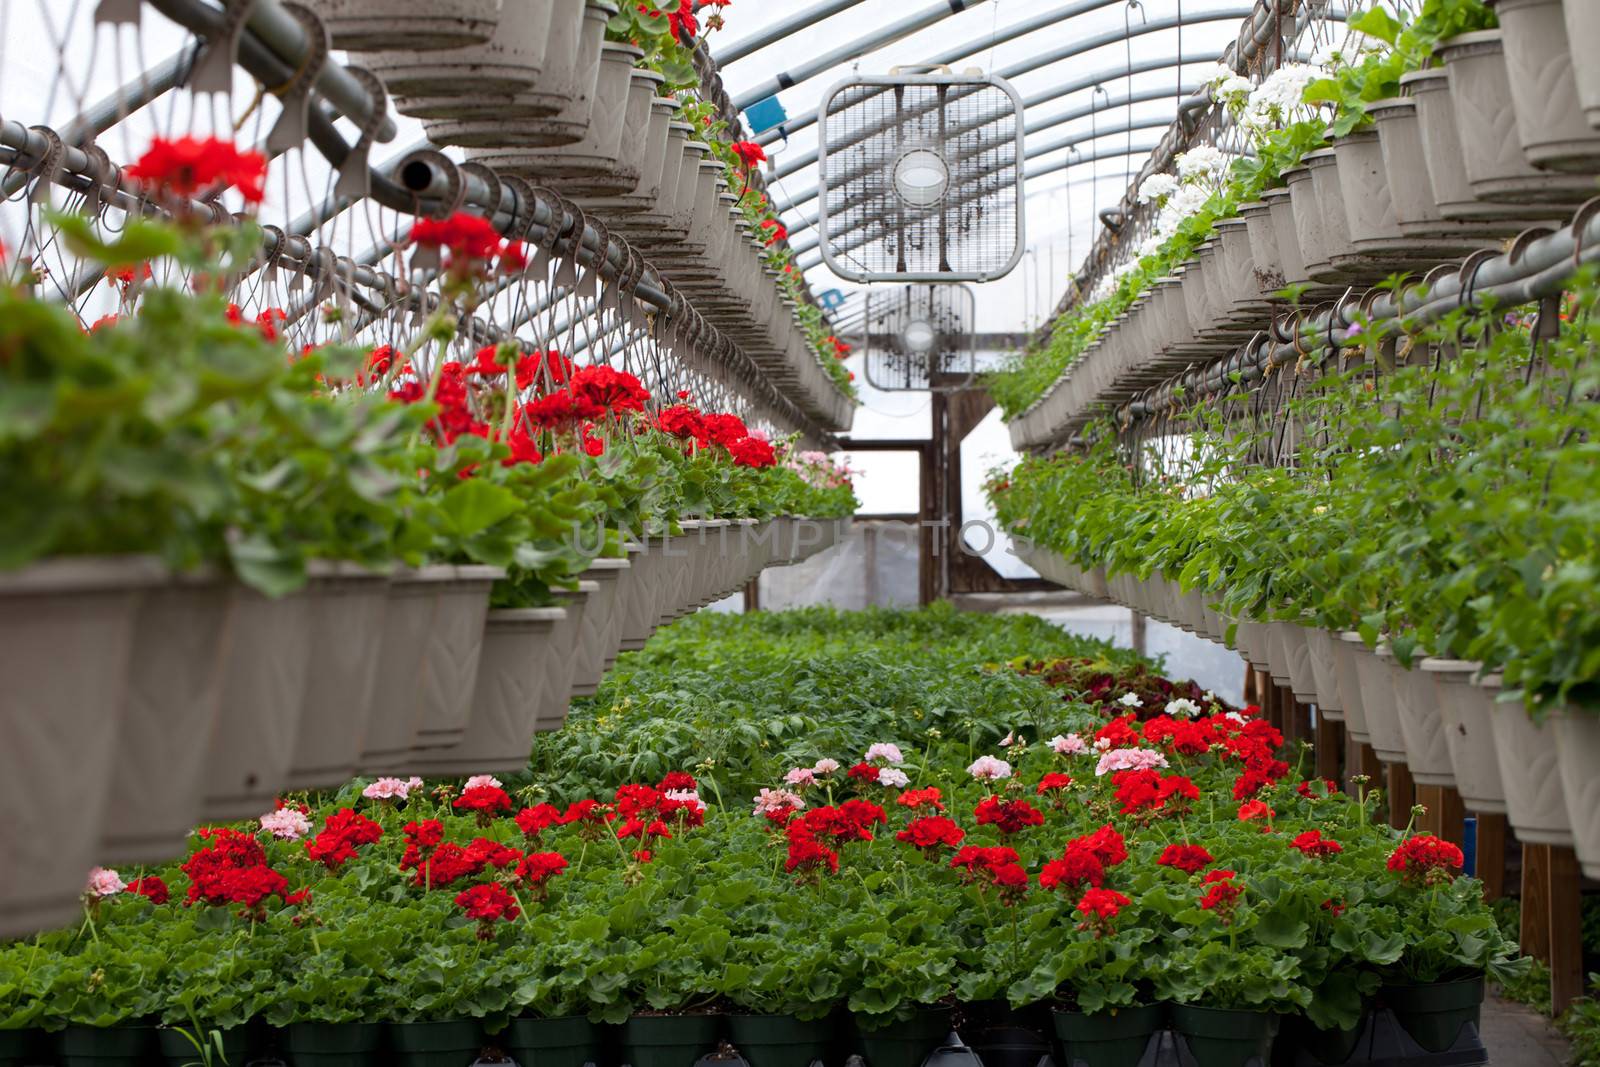 Greenhouse nursery with a variety of colorful flowers plants and hanging baskets.